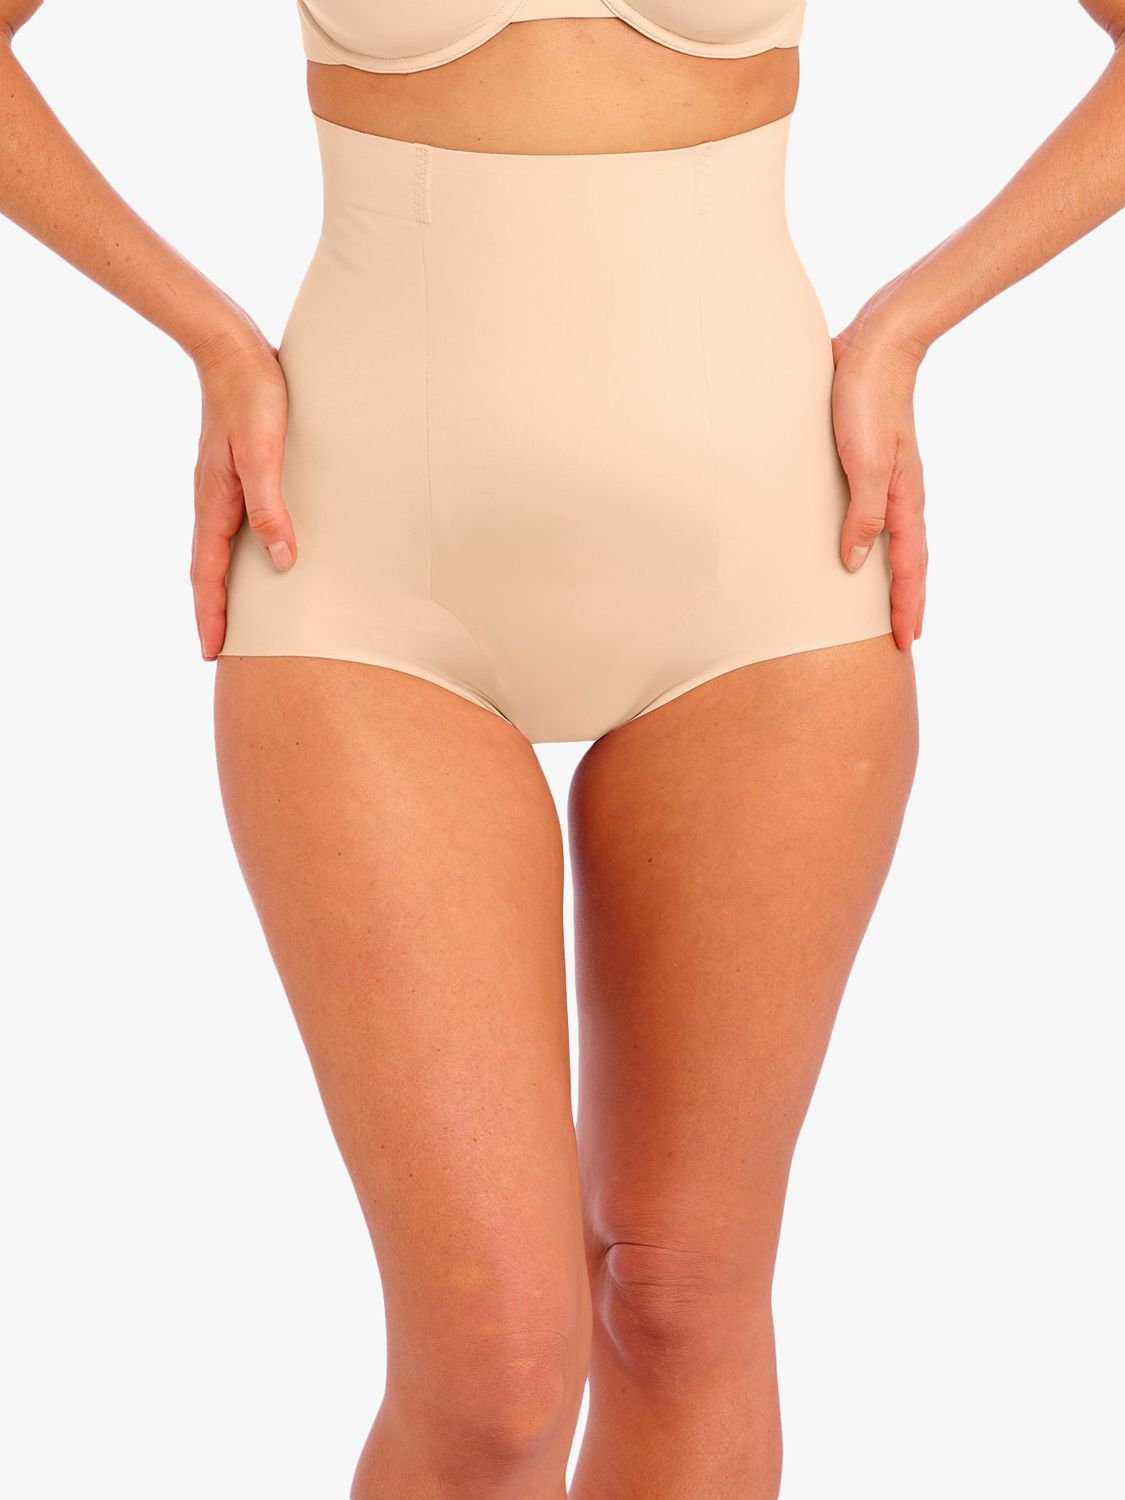 Wacoal Ines Secret High Waist Slimming Brief Knickers, Frappe at